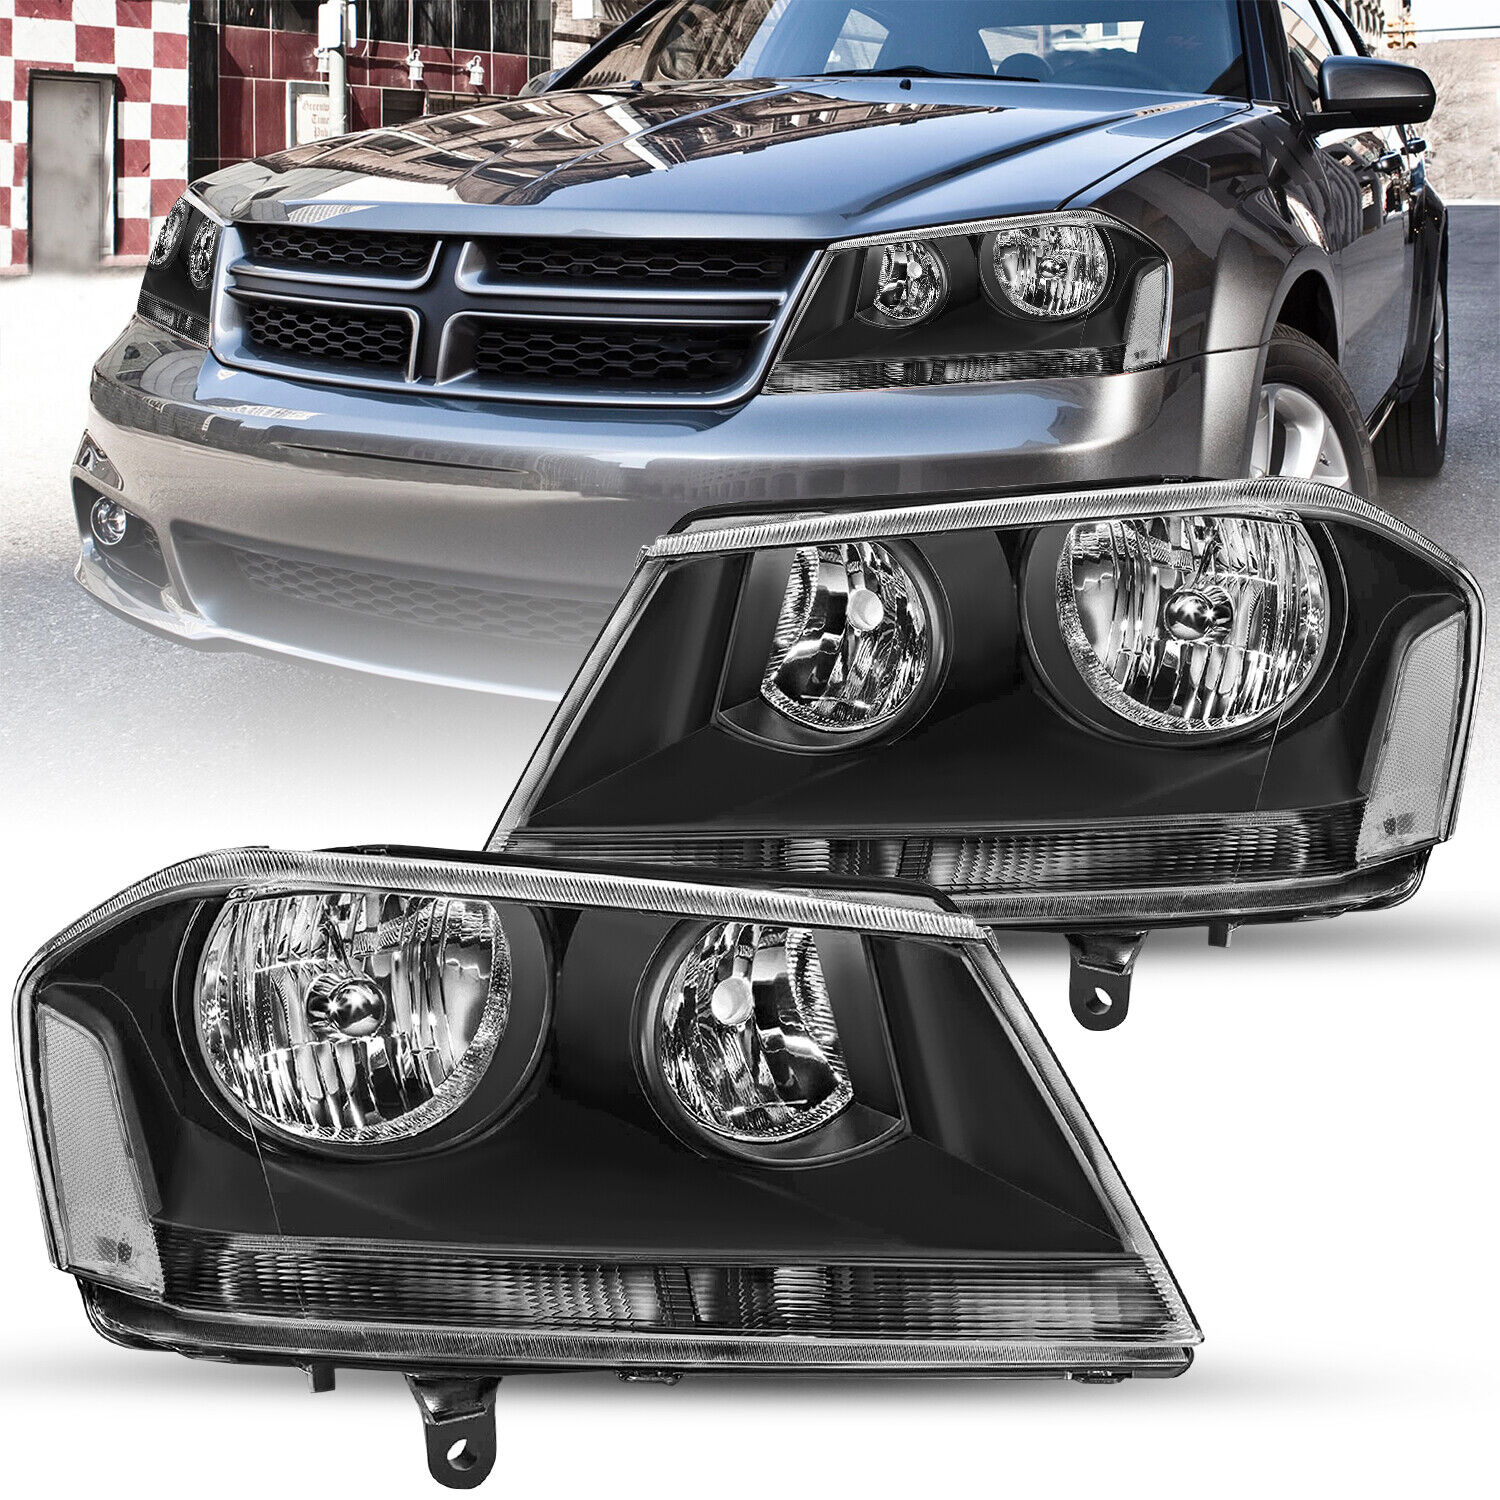 For 2008-2014 Dodge Avenger Headlight Black Clear Replacement Headlamps LH&RH